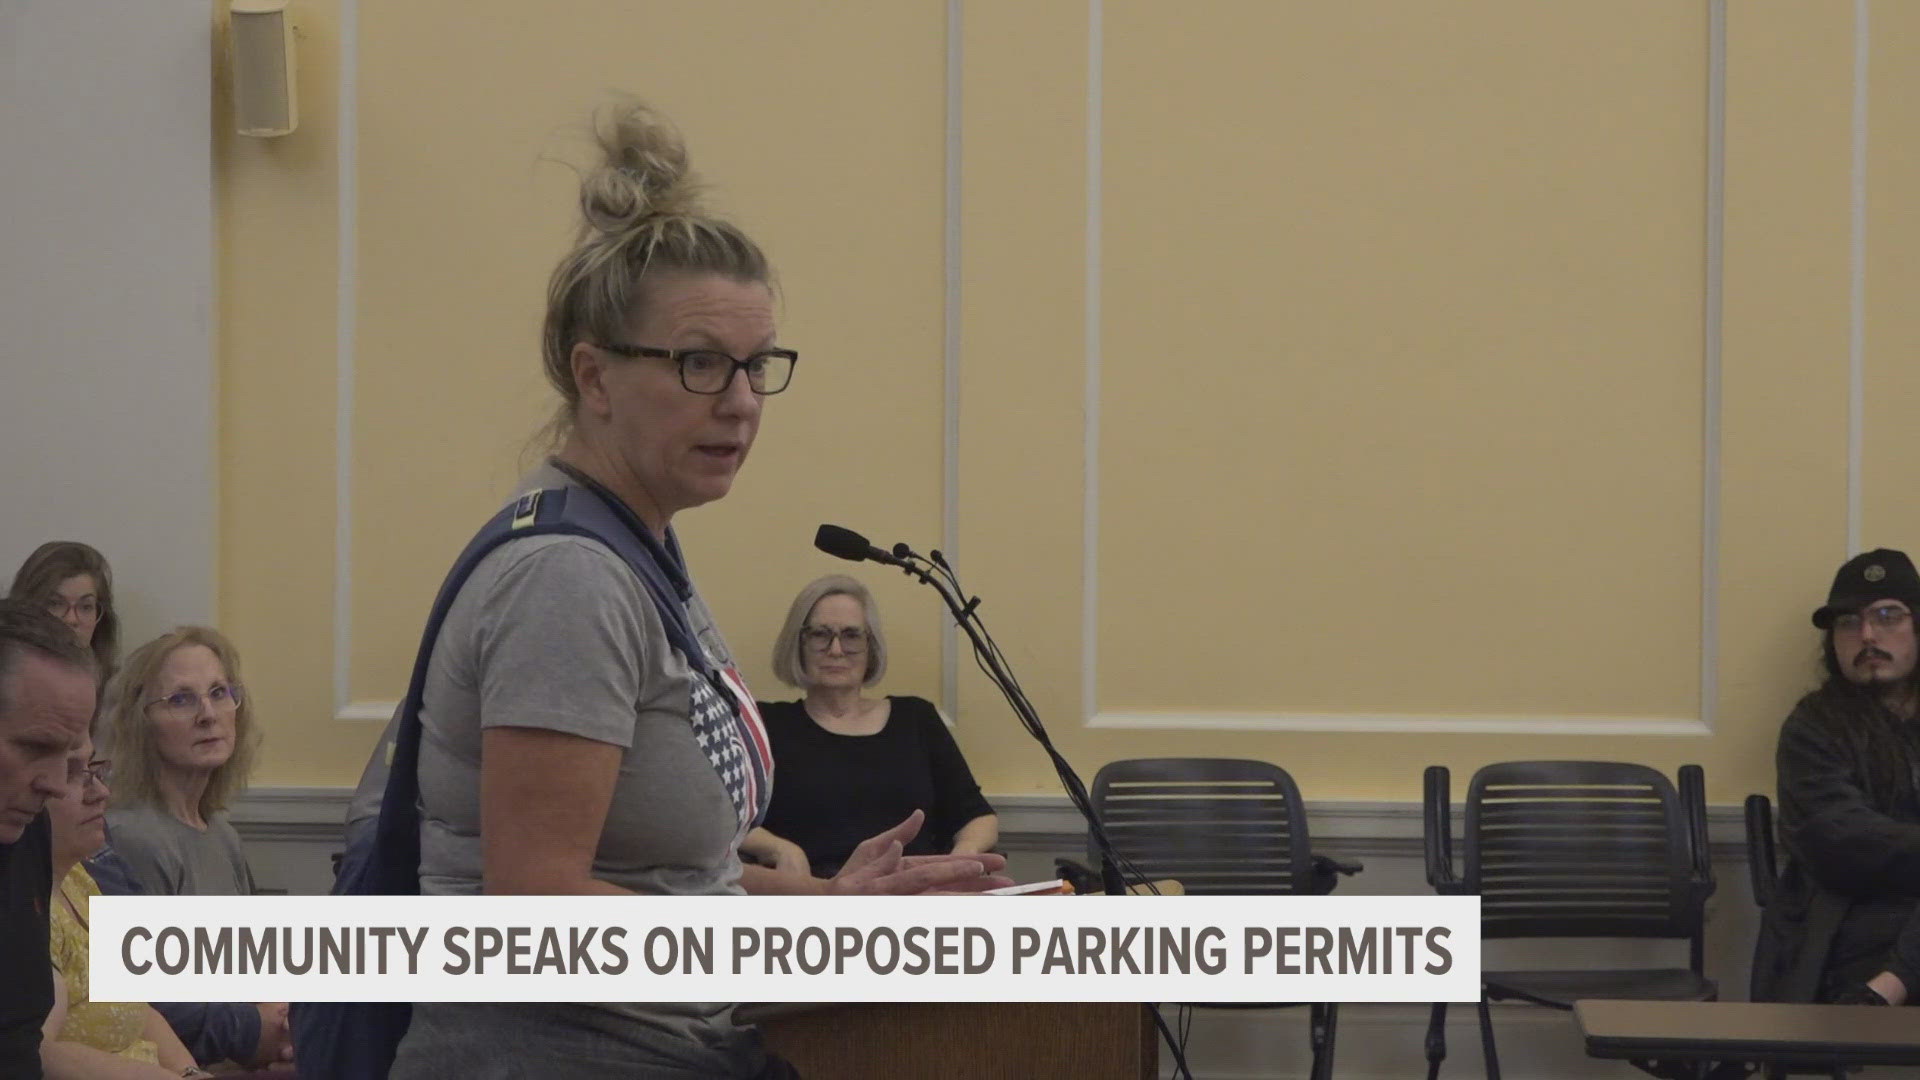 A vast majority of comments at the meeting, both spoken and received ahead of time, opposed the plan.